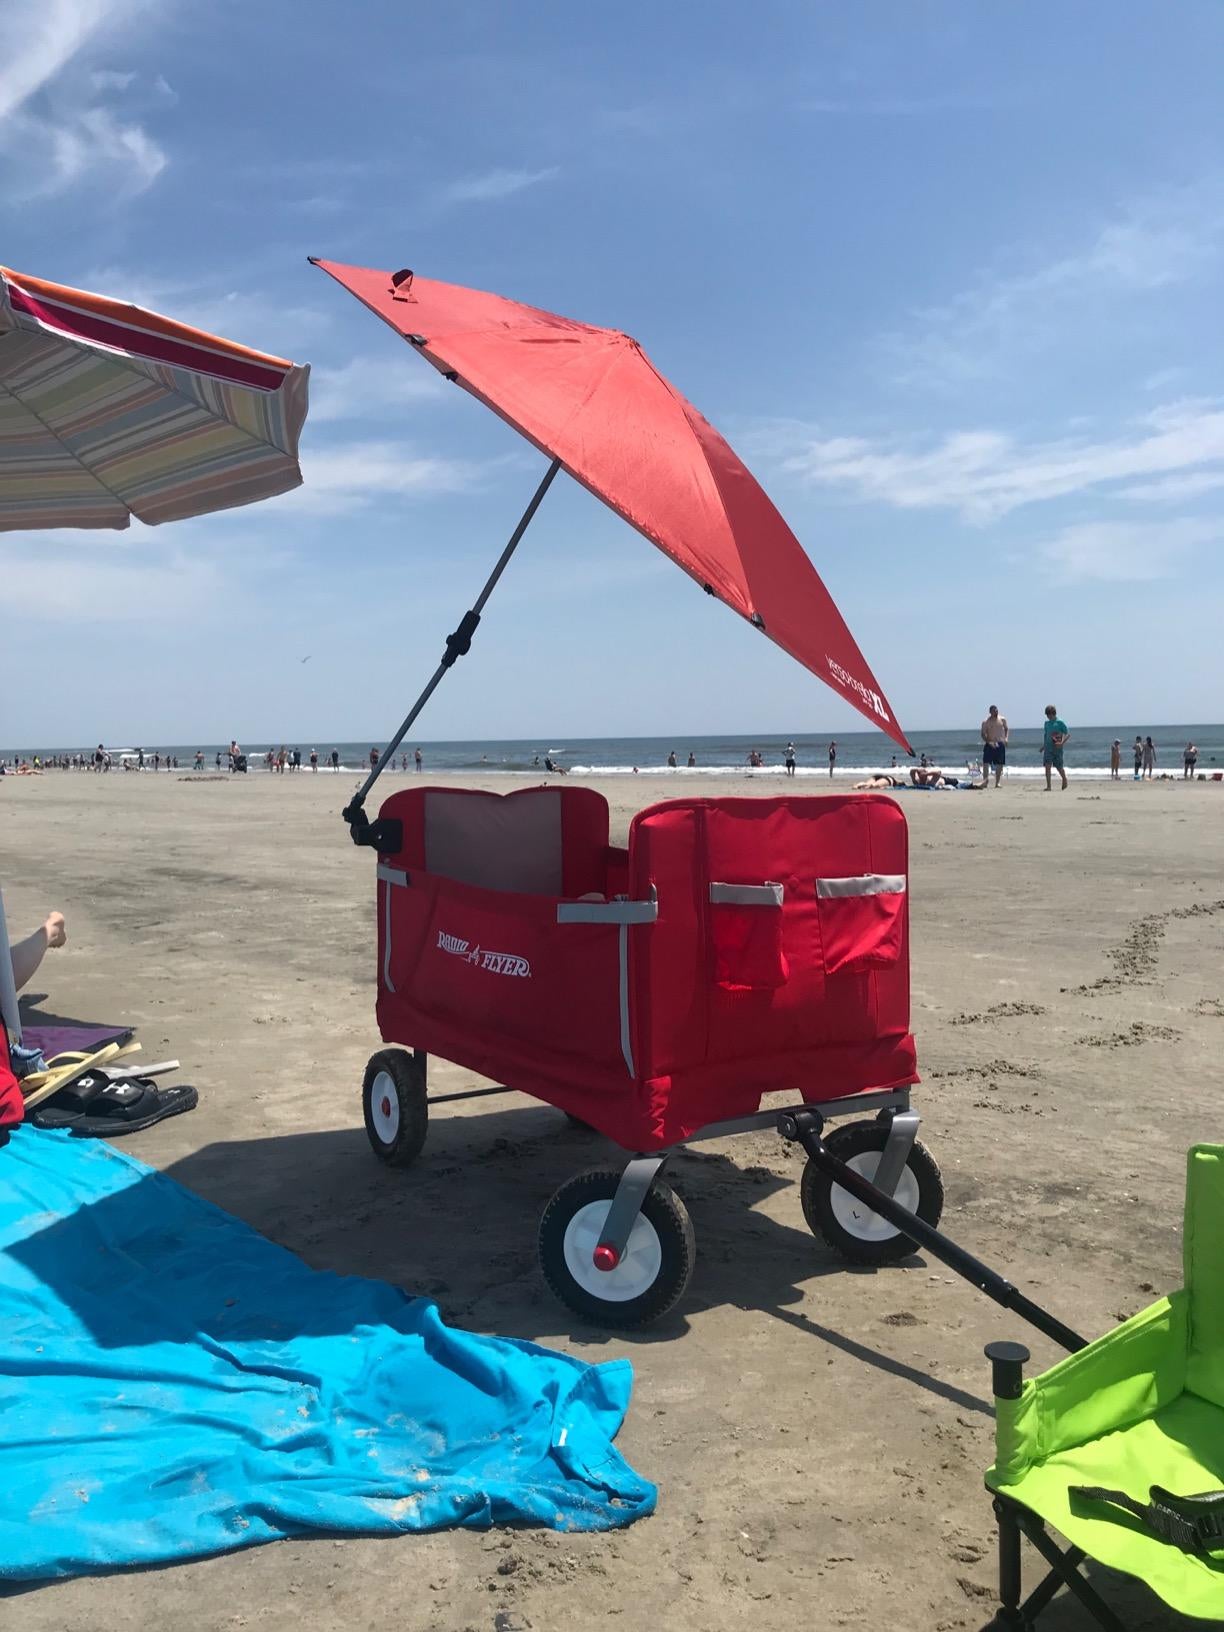 reviewer's photo of a red umbrella attached to a wagon on the beach